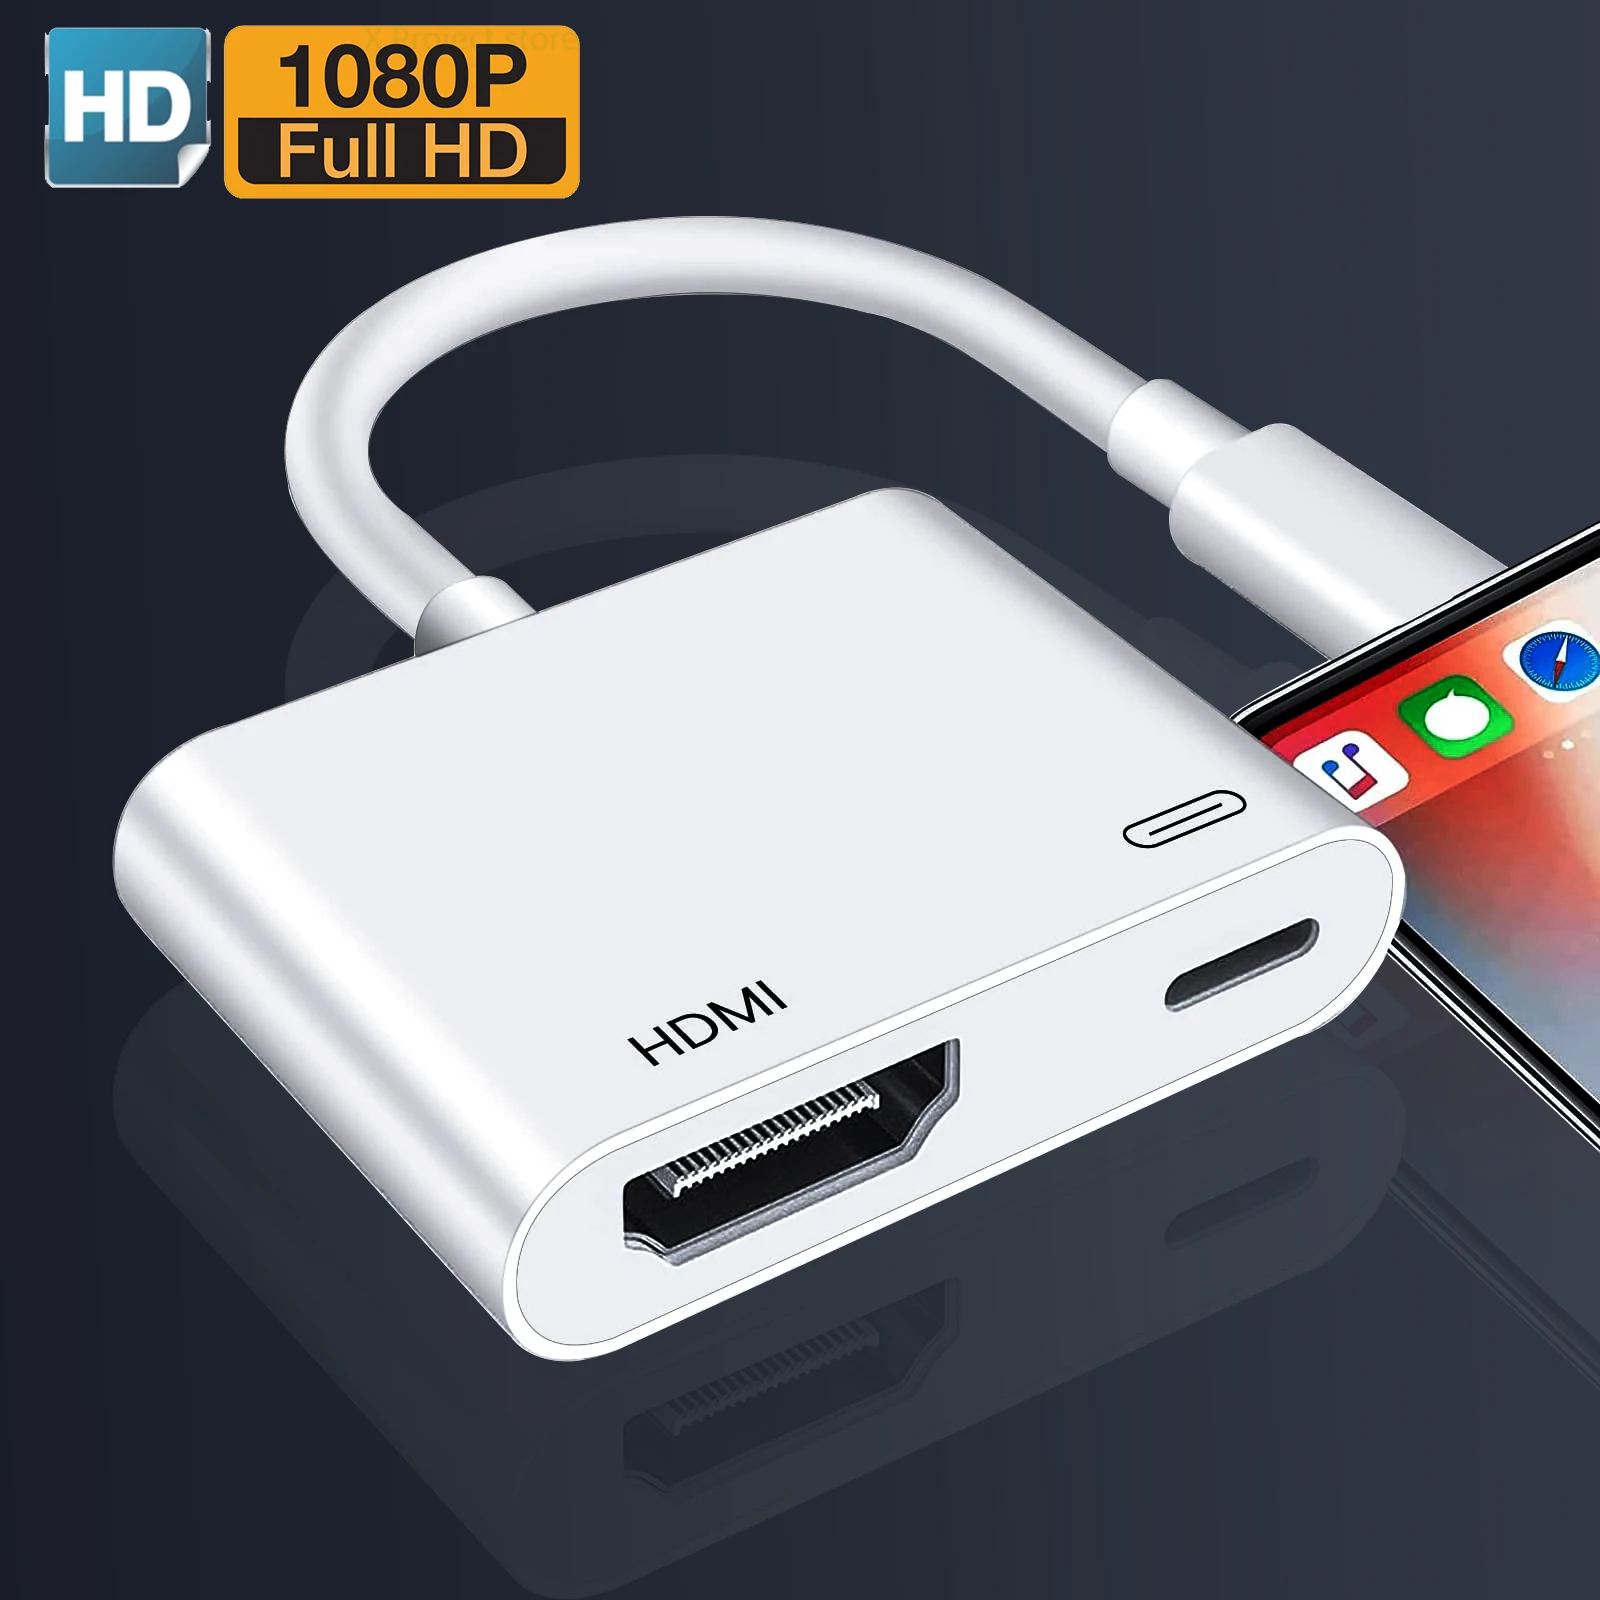 Phone to HDMI-compatible 1080P For iPhone TV Adapter Need Charging for iPhone iPod Models HDTV Display TV Monitors Projecto